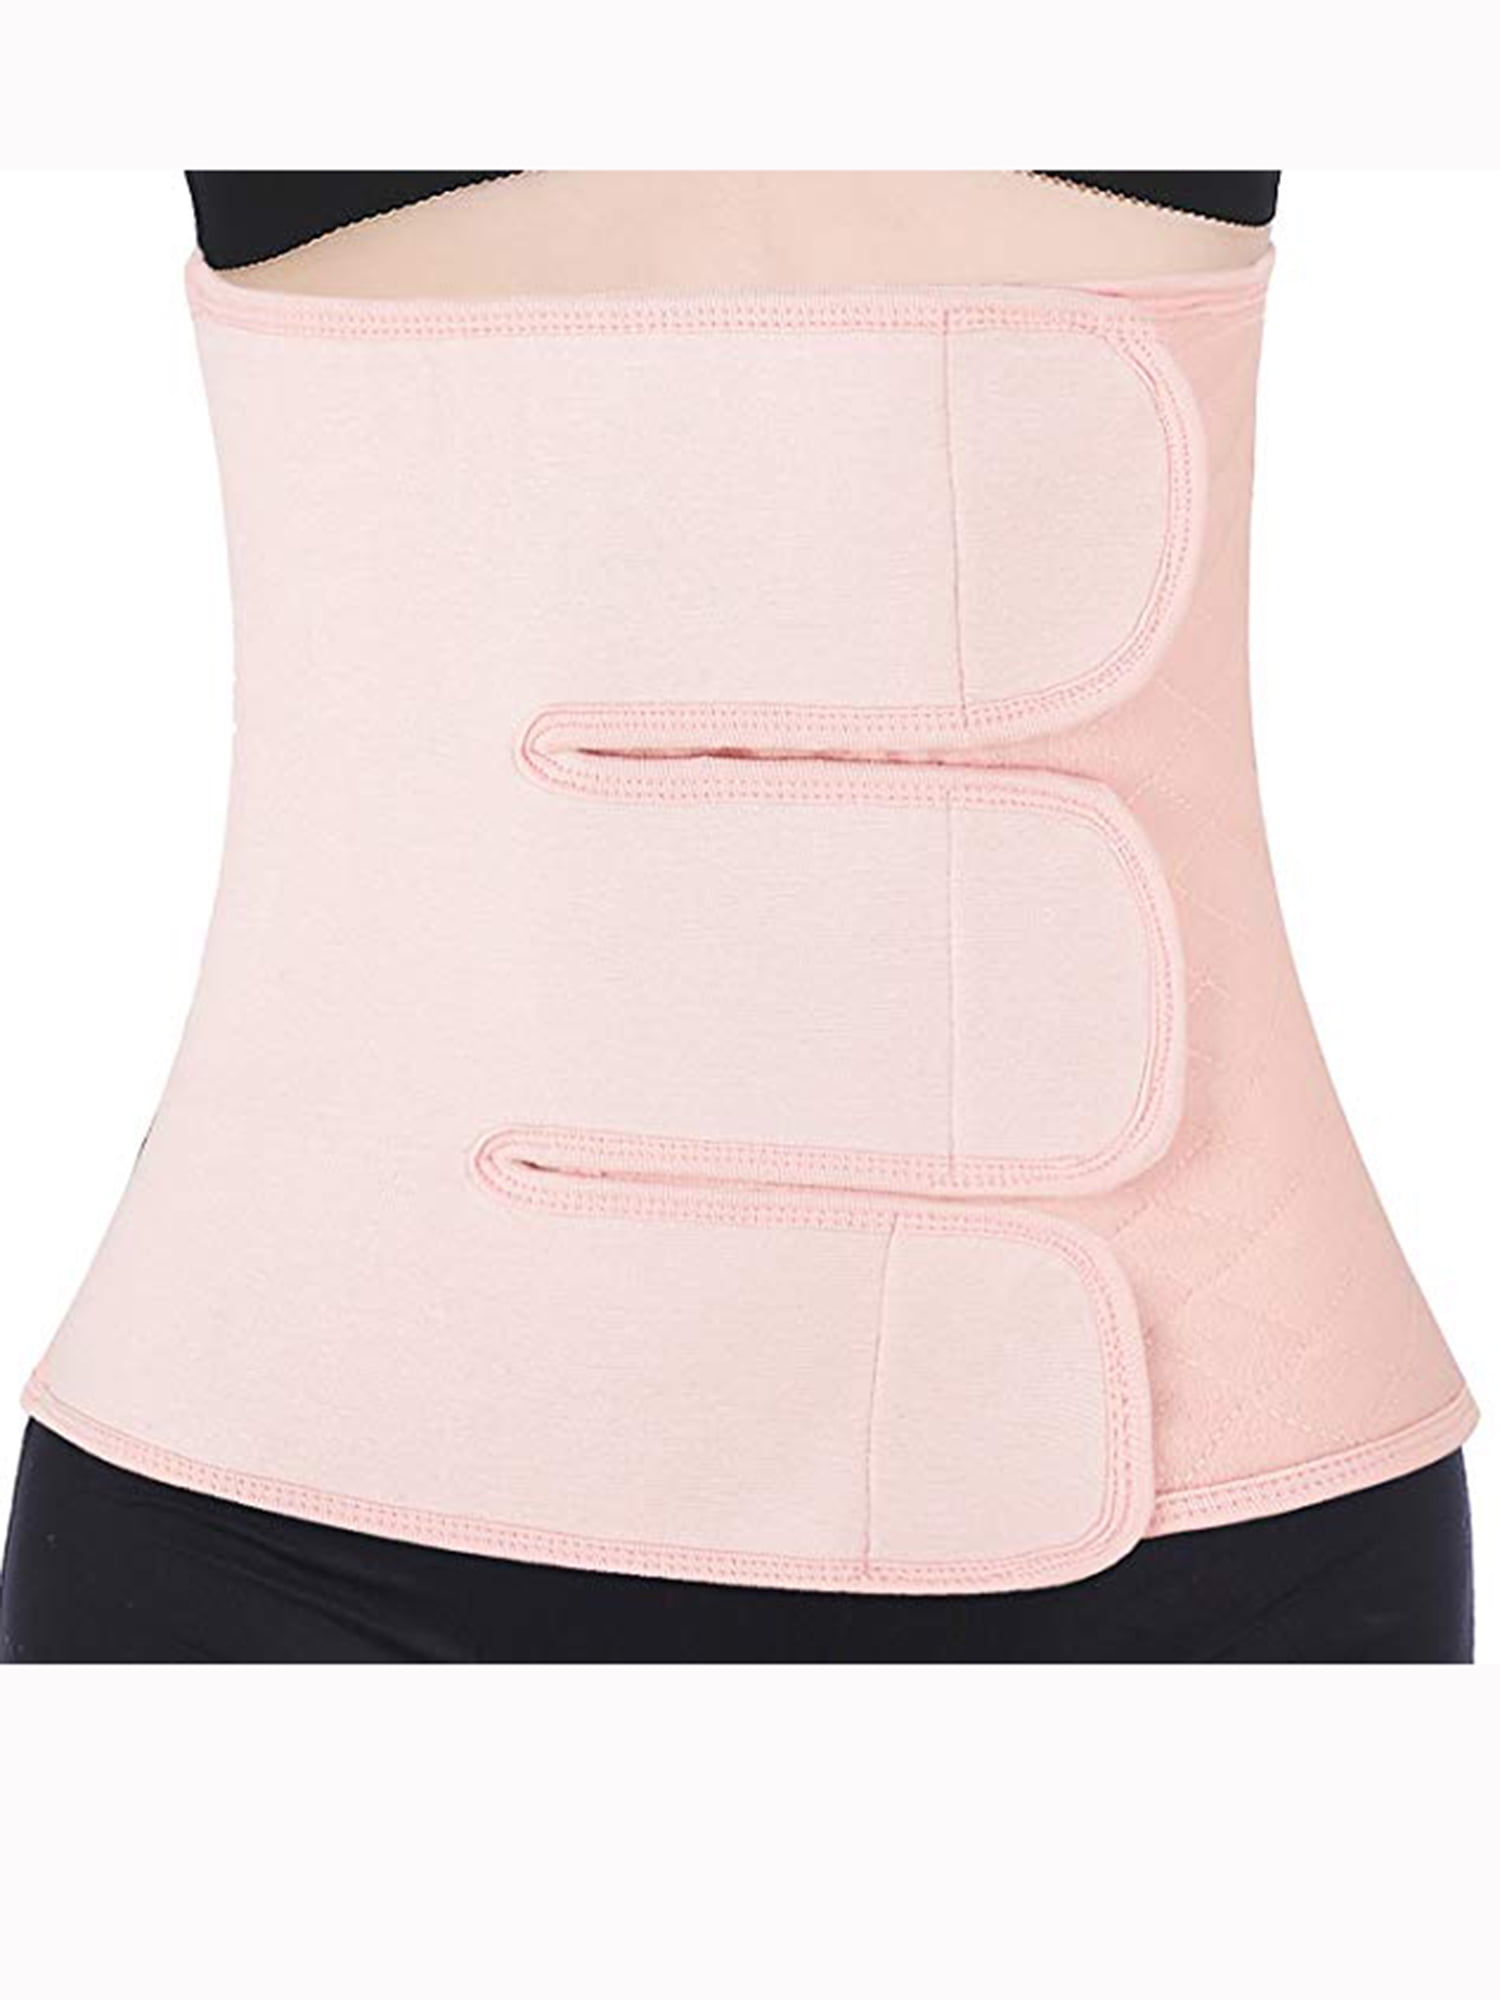 FUT Postpartum Girdle C-Section Recovery Belt Back Support Belly Wrap Belly Band Shapewear